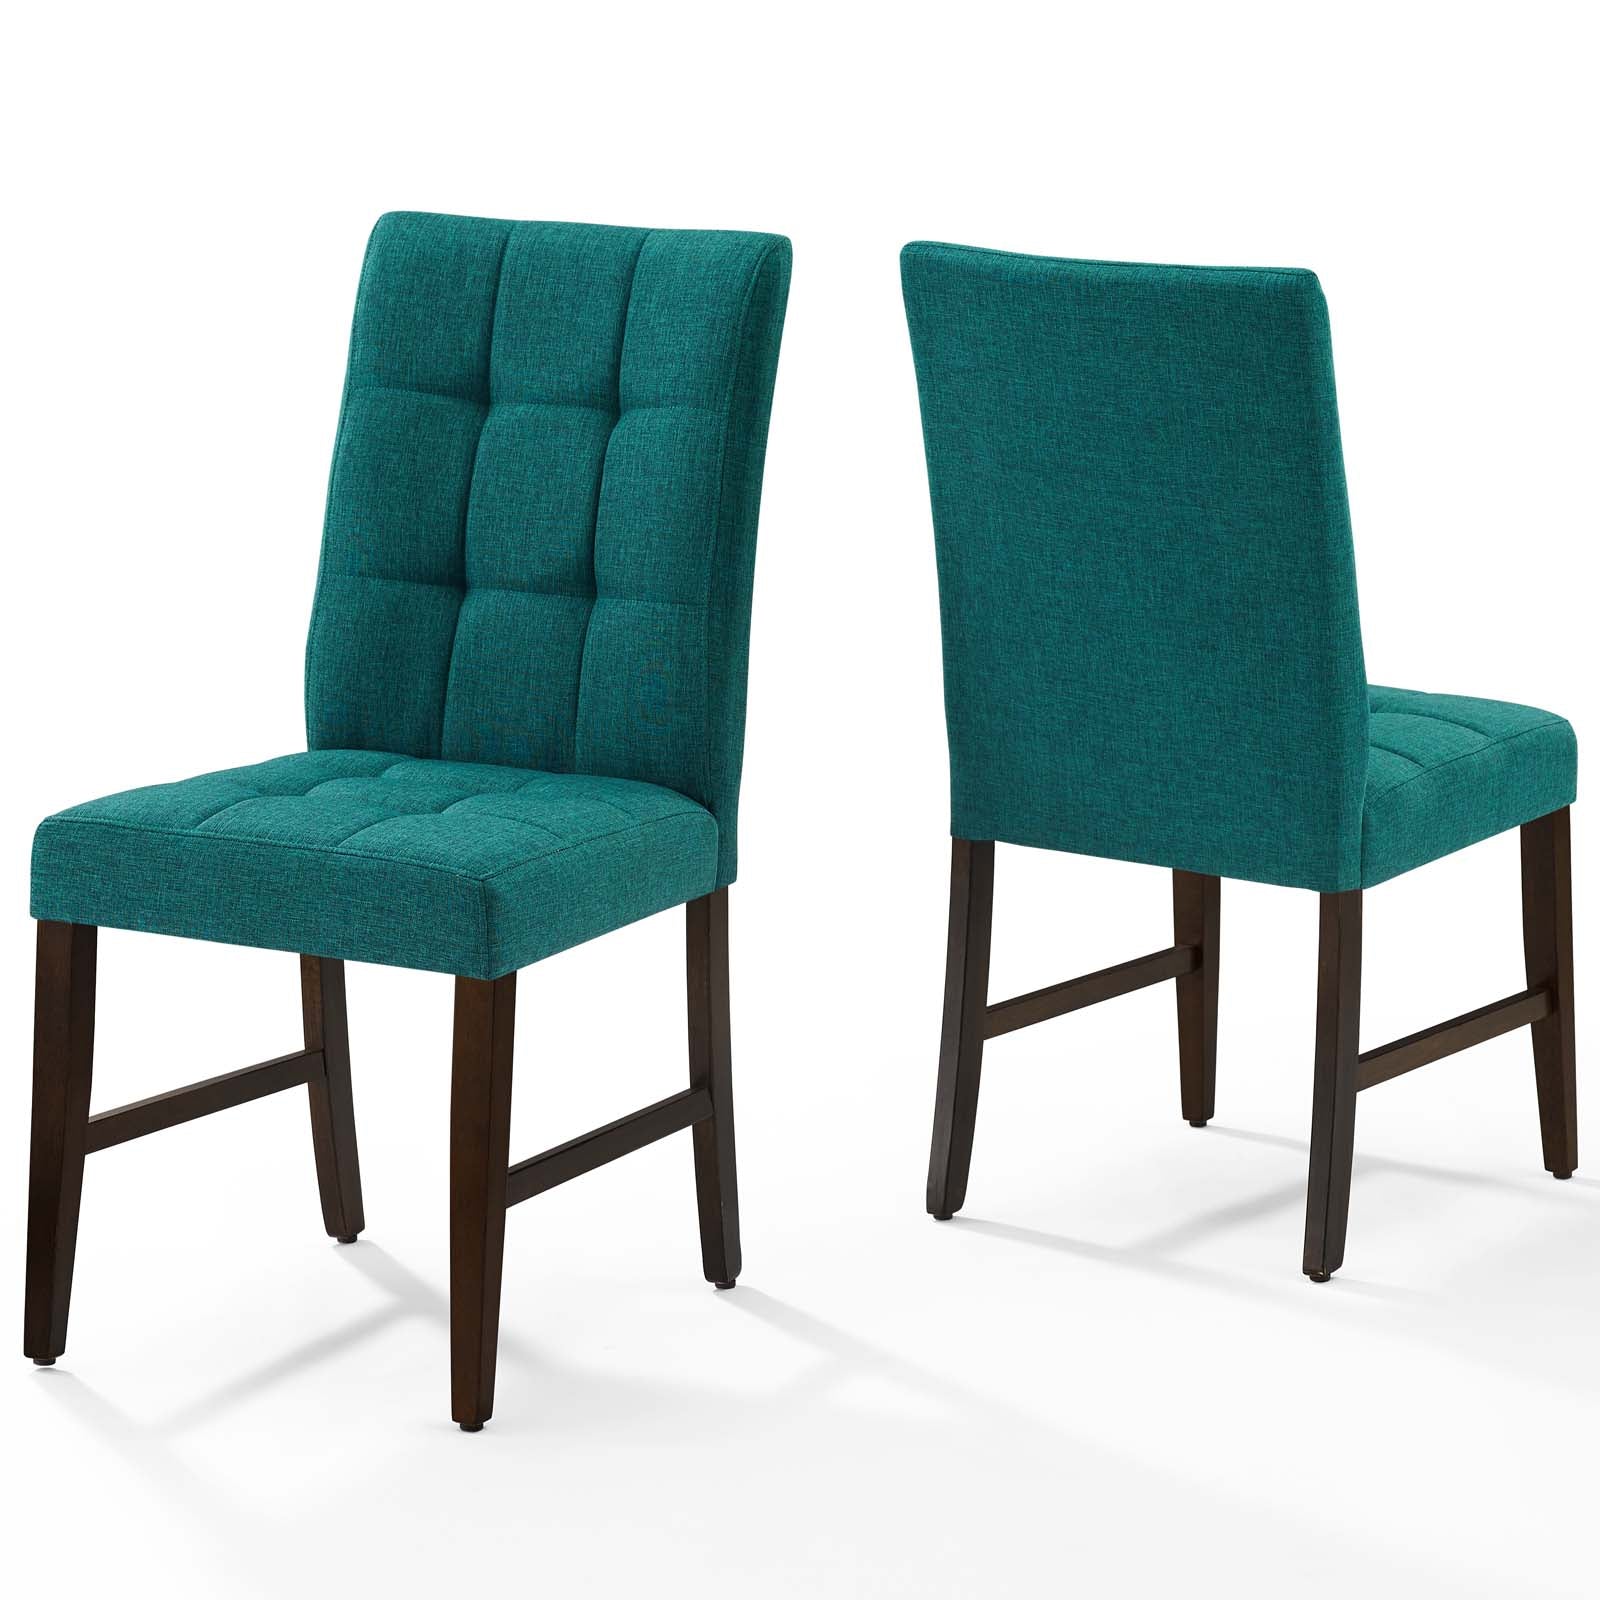 Modway Dining Chairs - Promulgate Biscuit Tufted Upholstered Fabric Dining Chair Set Of 2 Teal